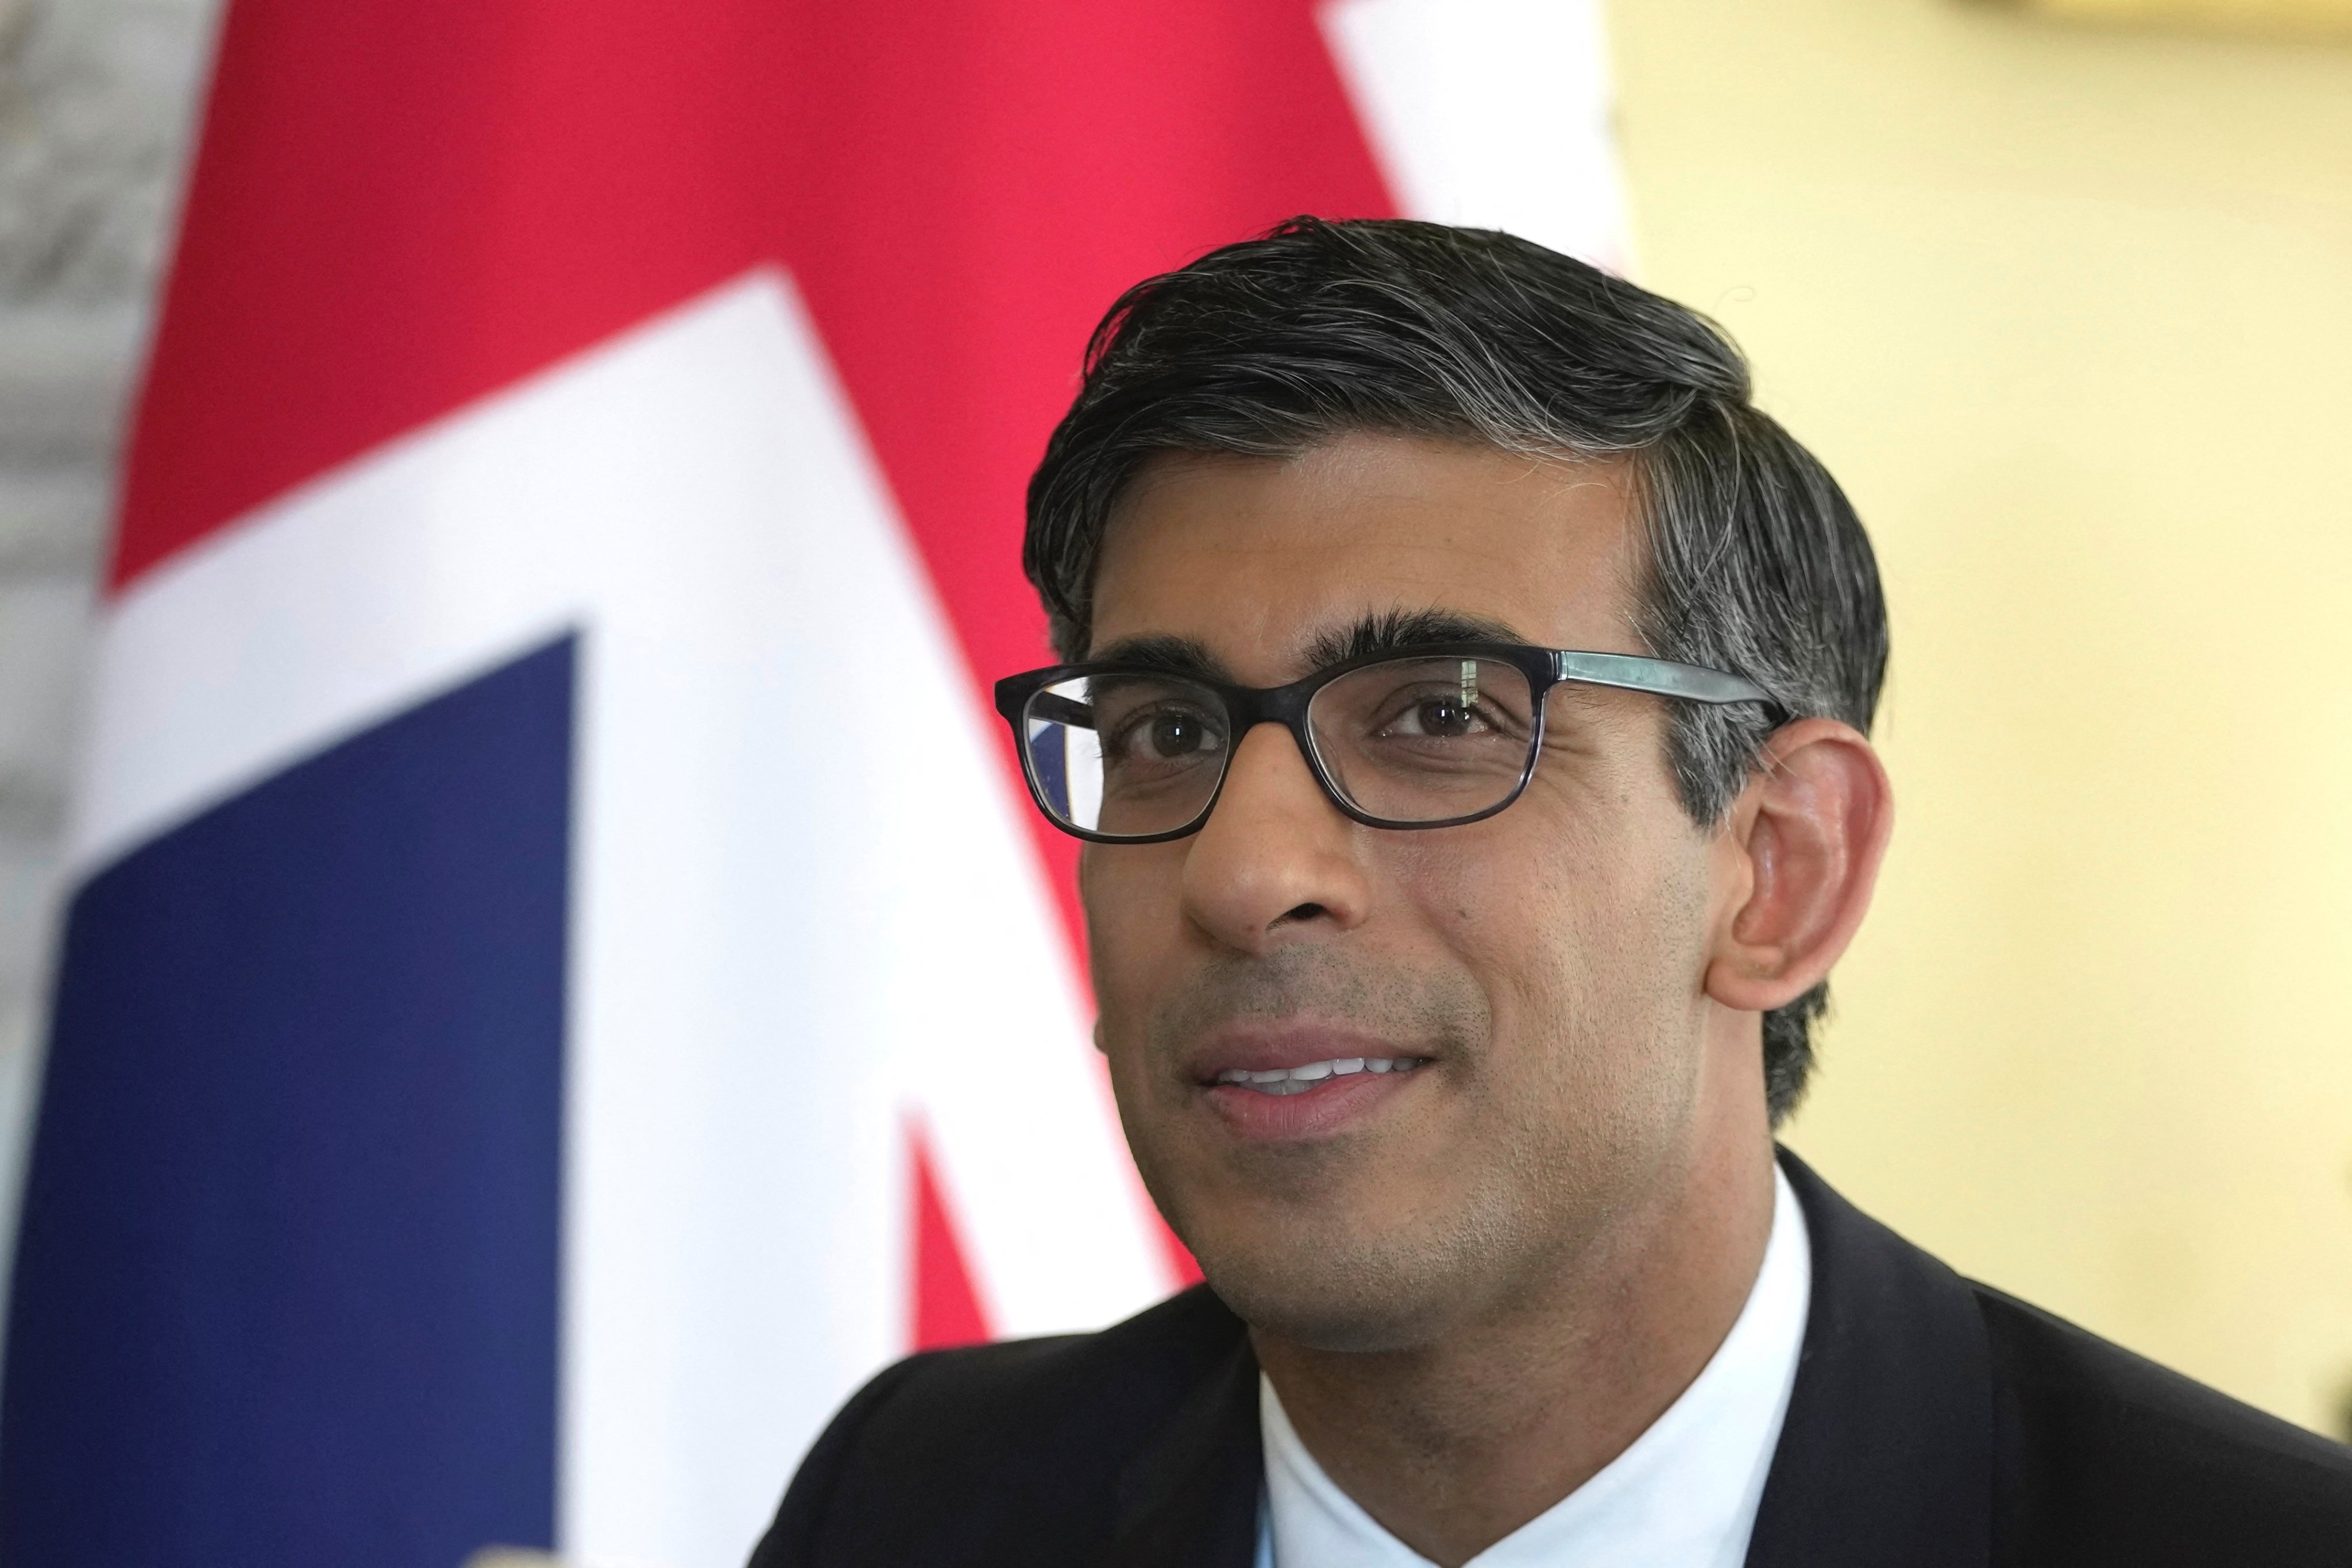 While Rishi Sunak is Britain’s first Asian Prime Minister, a report by the Institute for Black Economic Mobility indicates momentum in racial equality has stalled in the country. Photo: Reuters